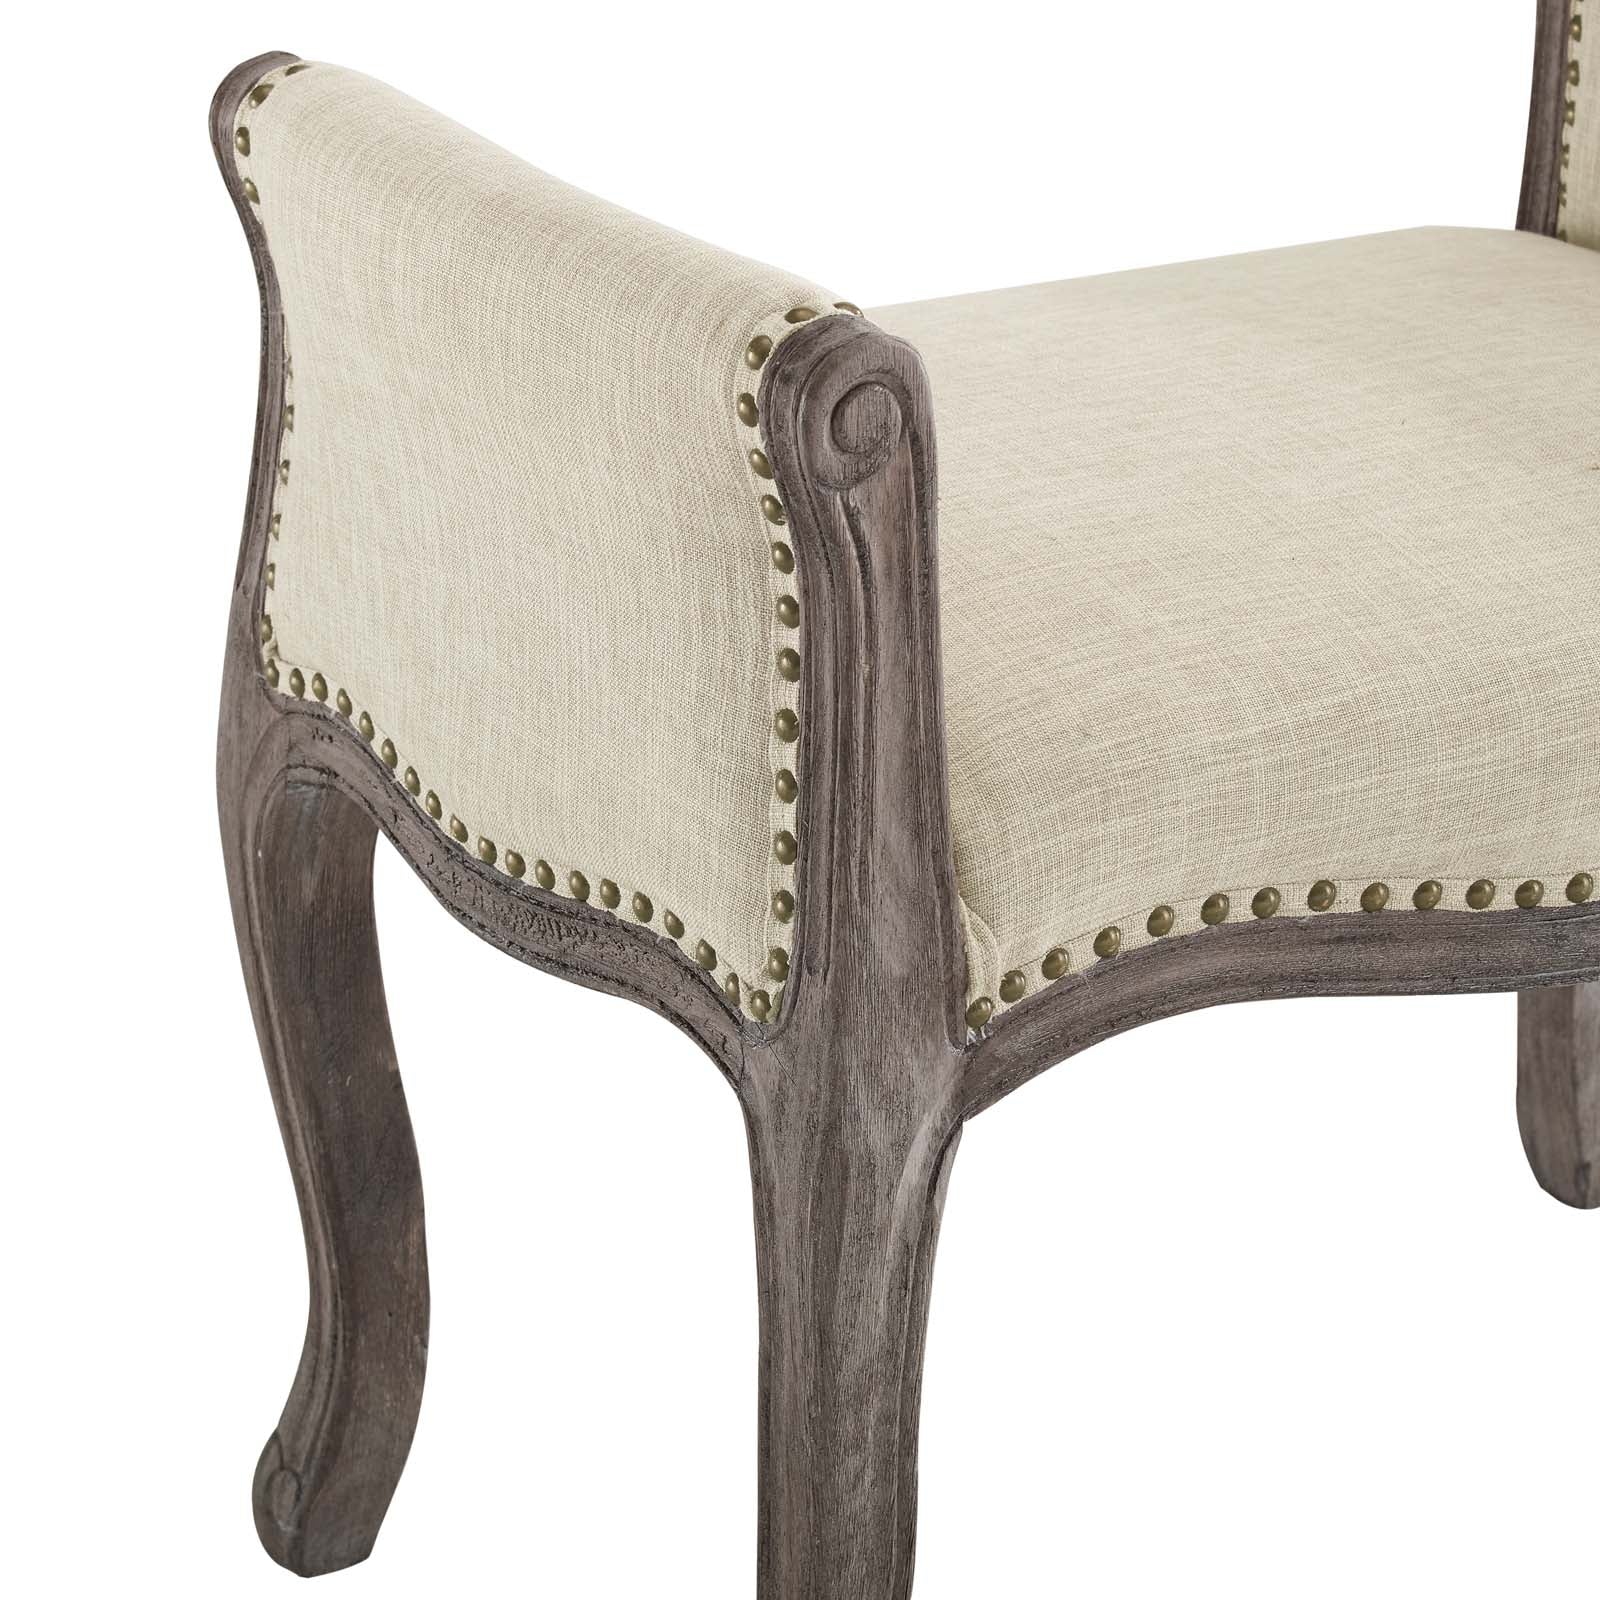 Avail Vintage French Upholstered Fabric Bench - East Shore Modern Home Furnishings